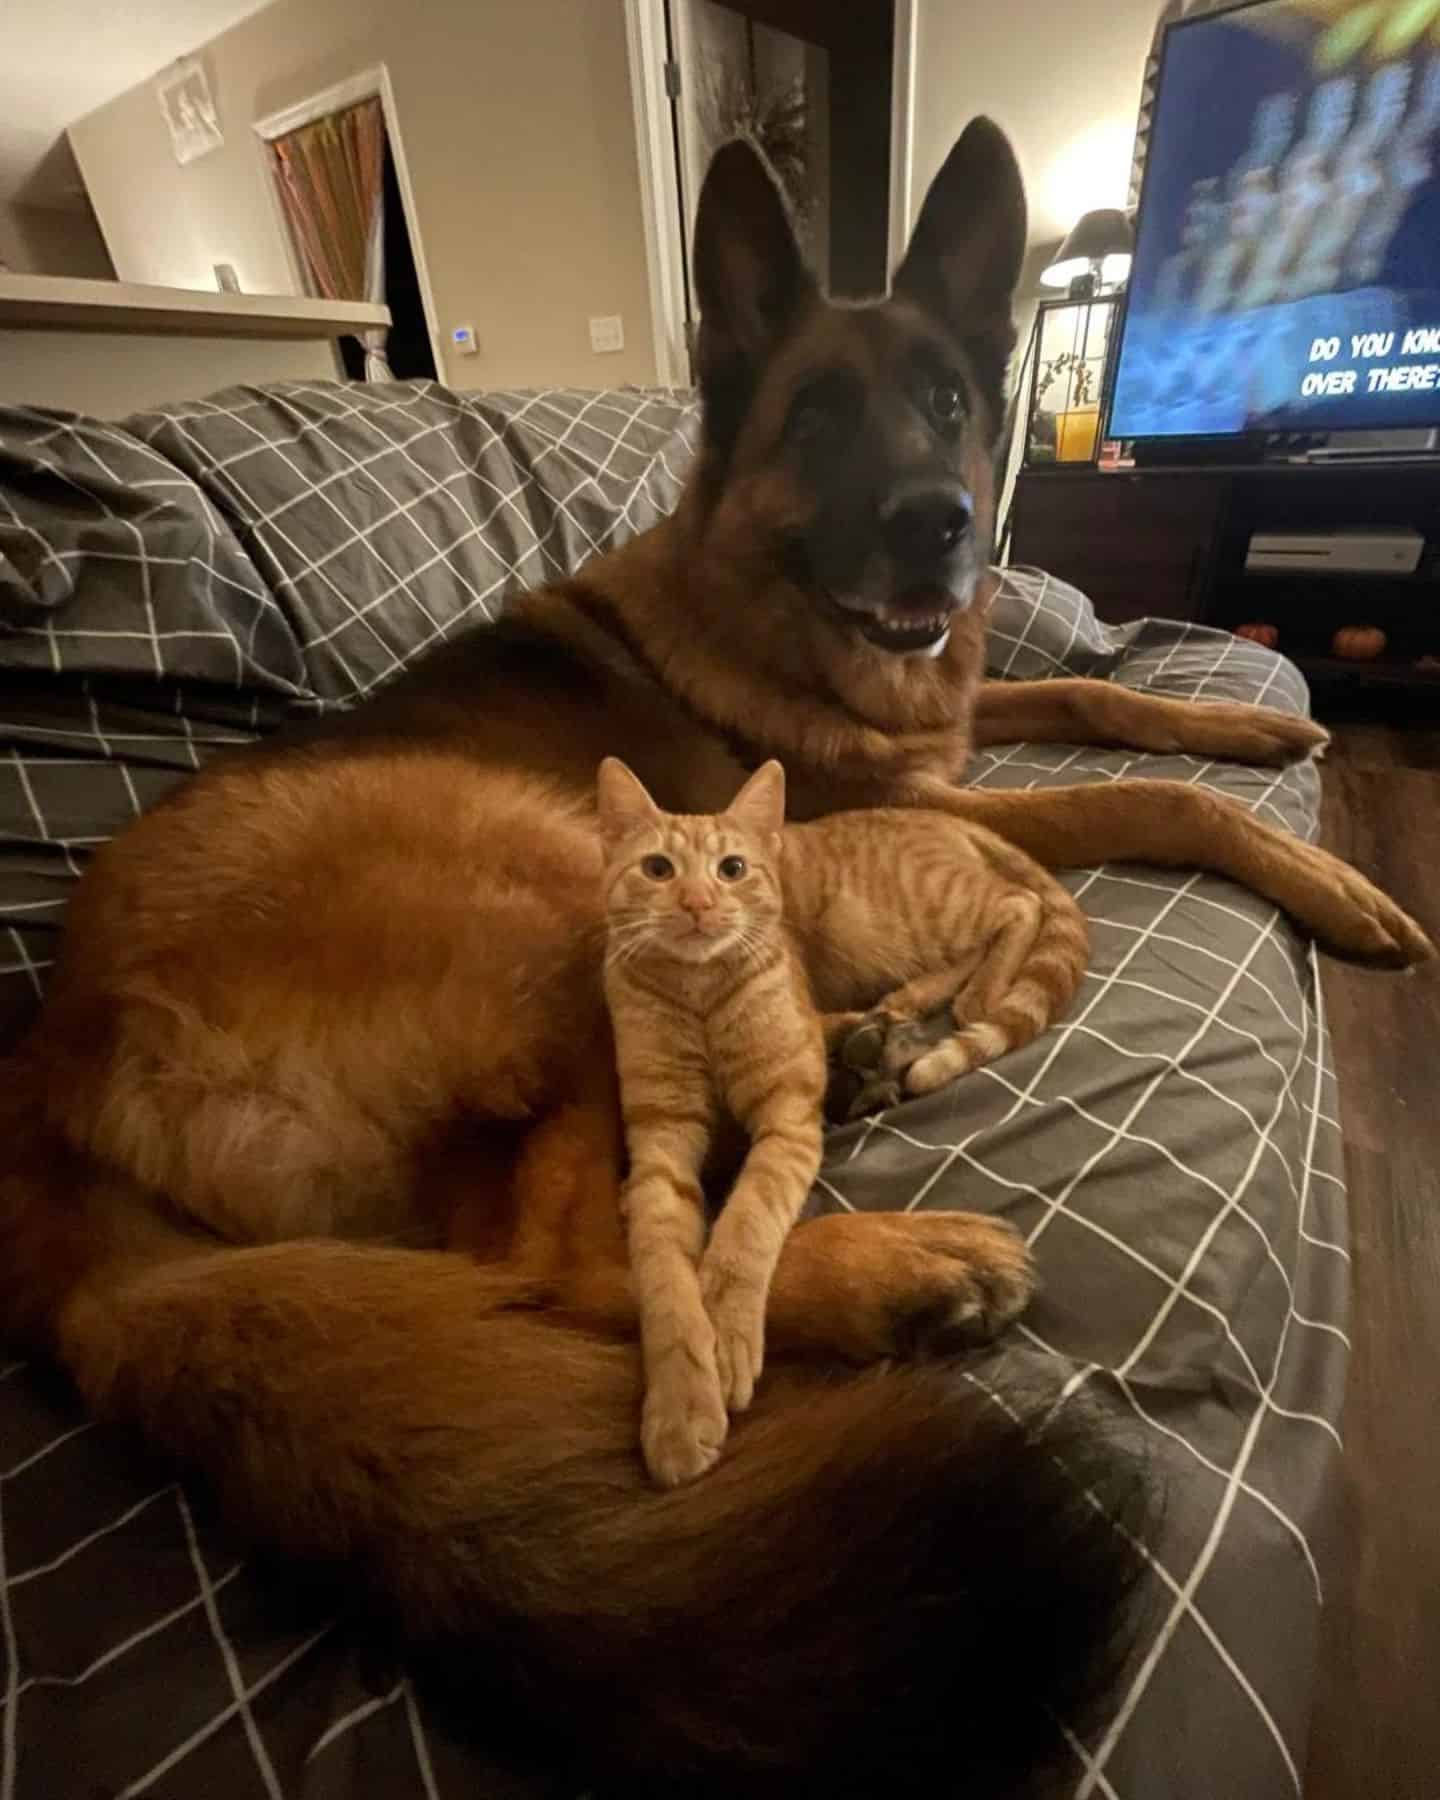 the cat lies next to the German shepherd on the bed